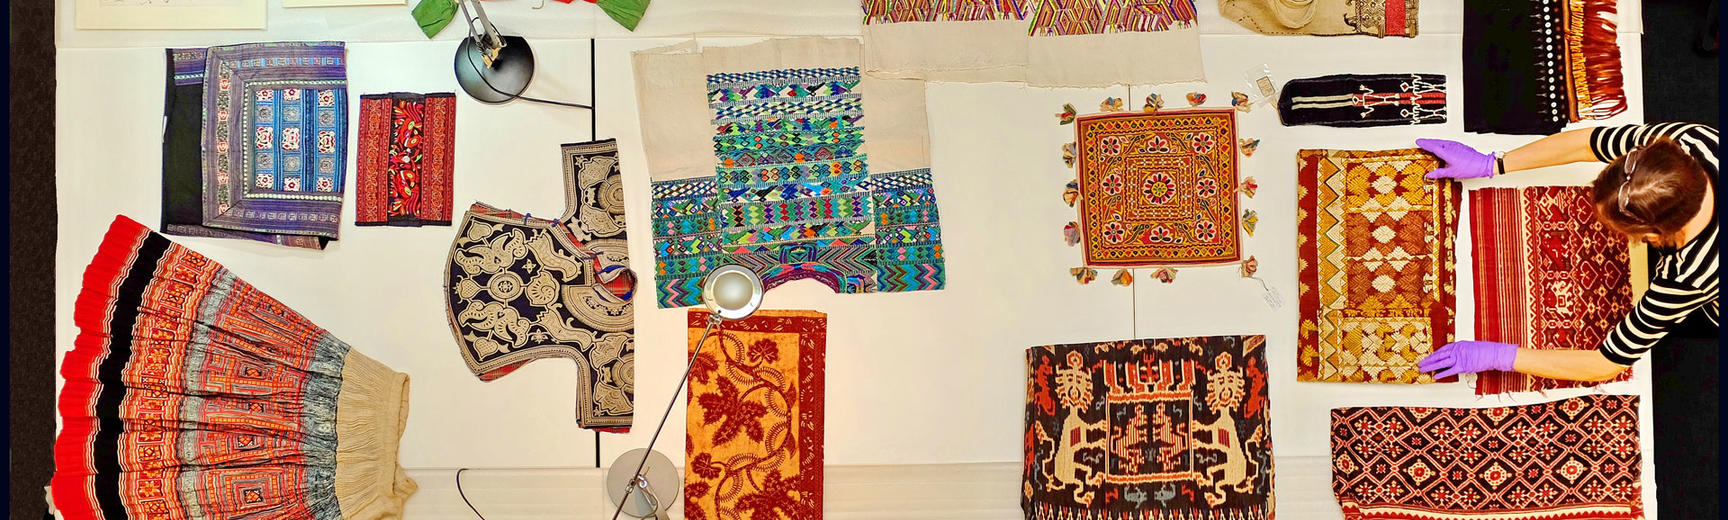 Preparation of textile items for visiting researchers